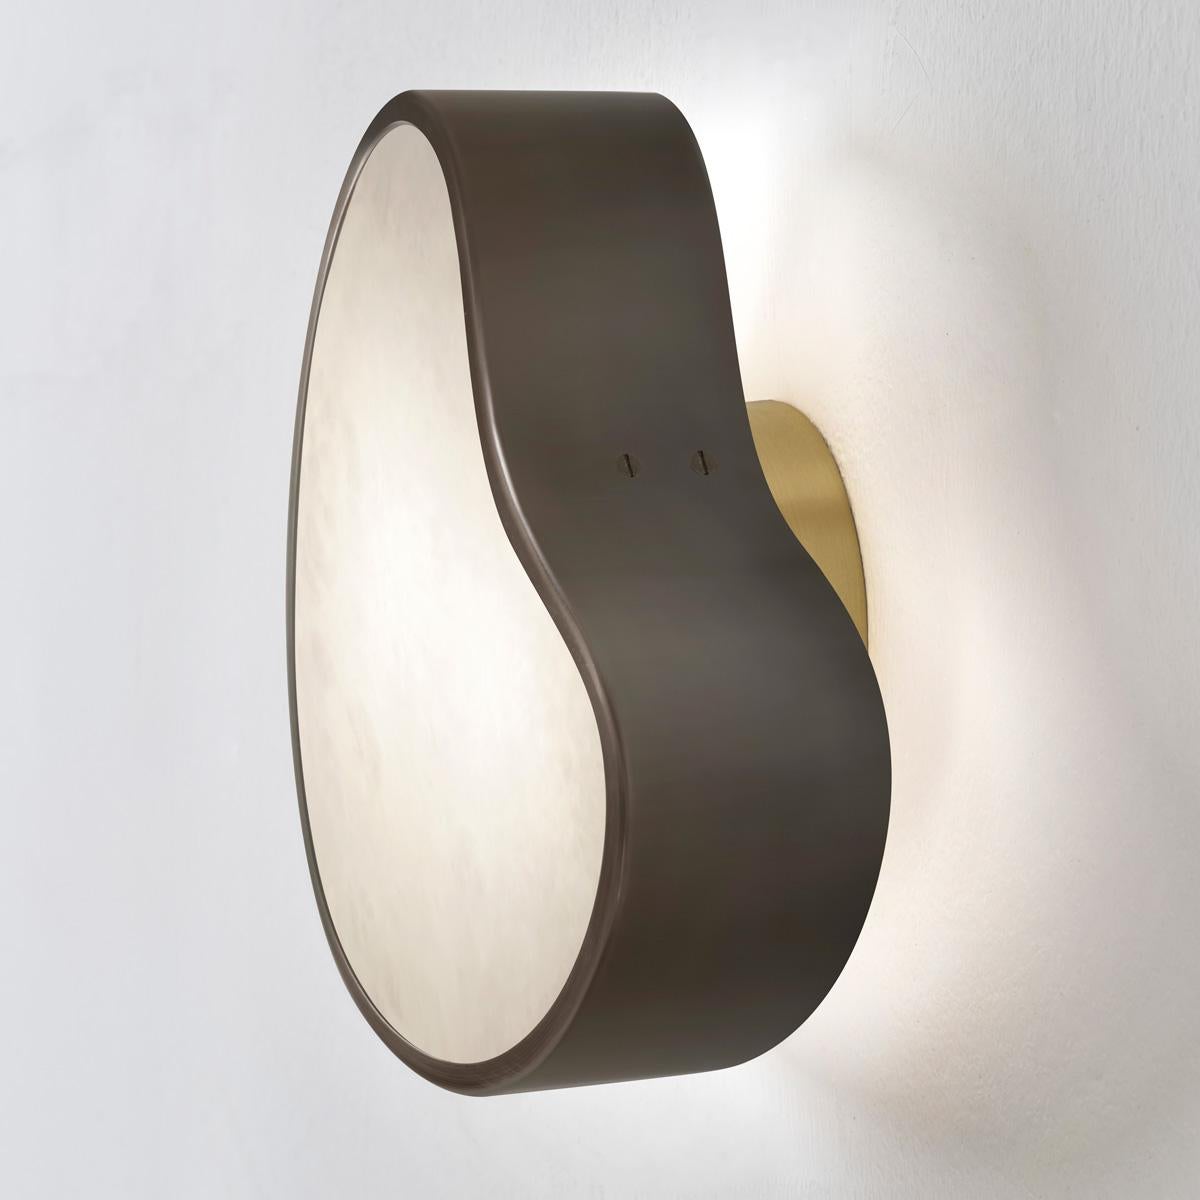 Cuore Wall Light by Gaspare Asaro. Backlit Version. Bronze Finish For Sale 3